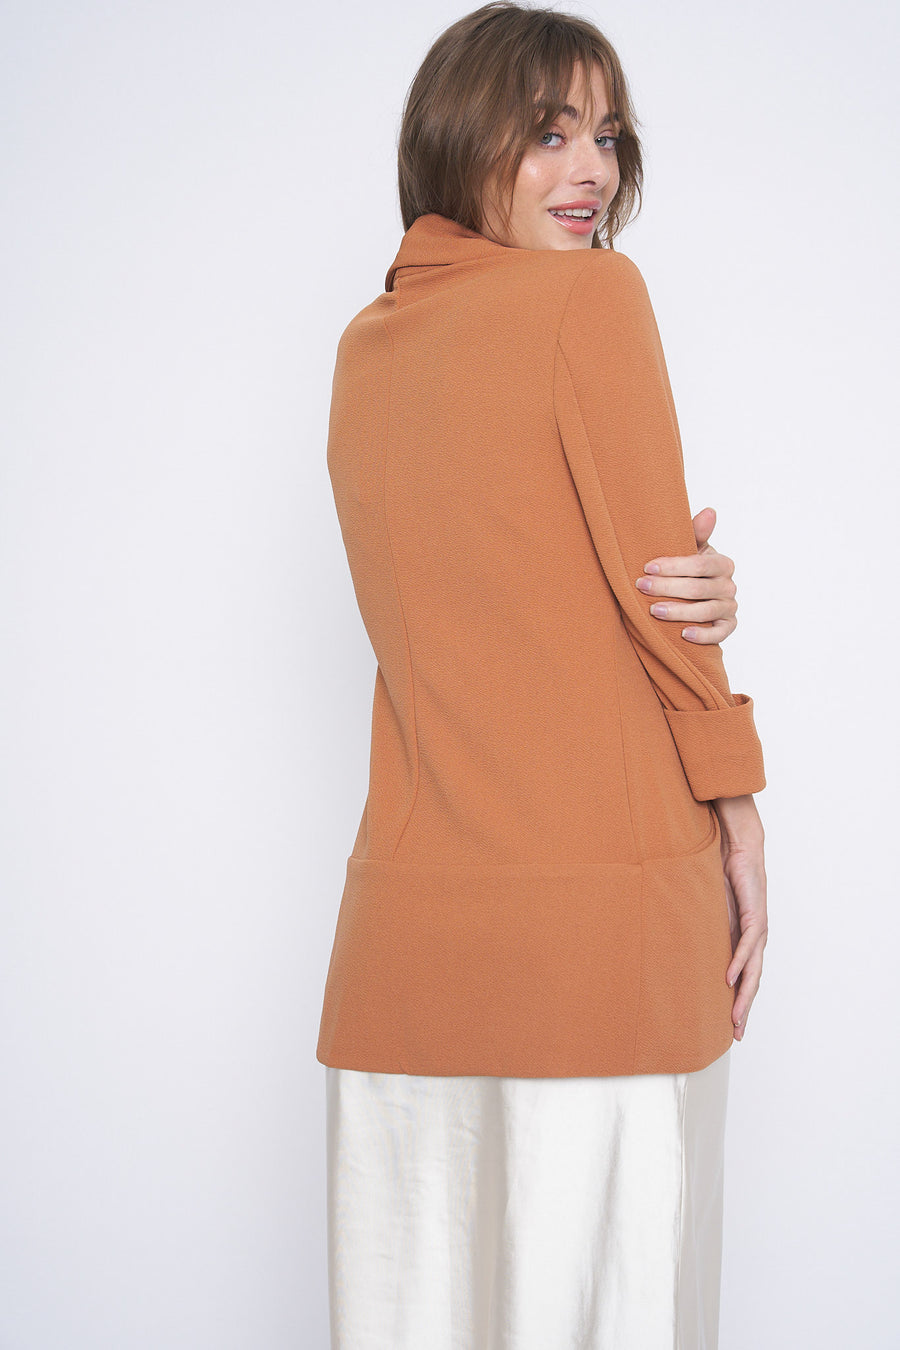 No Srcipt image - Images of 5 of 5 Classic Melanie Shawl Ash Brown Color Staple Workwear Blazer